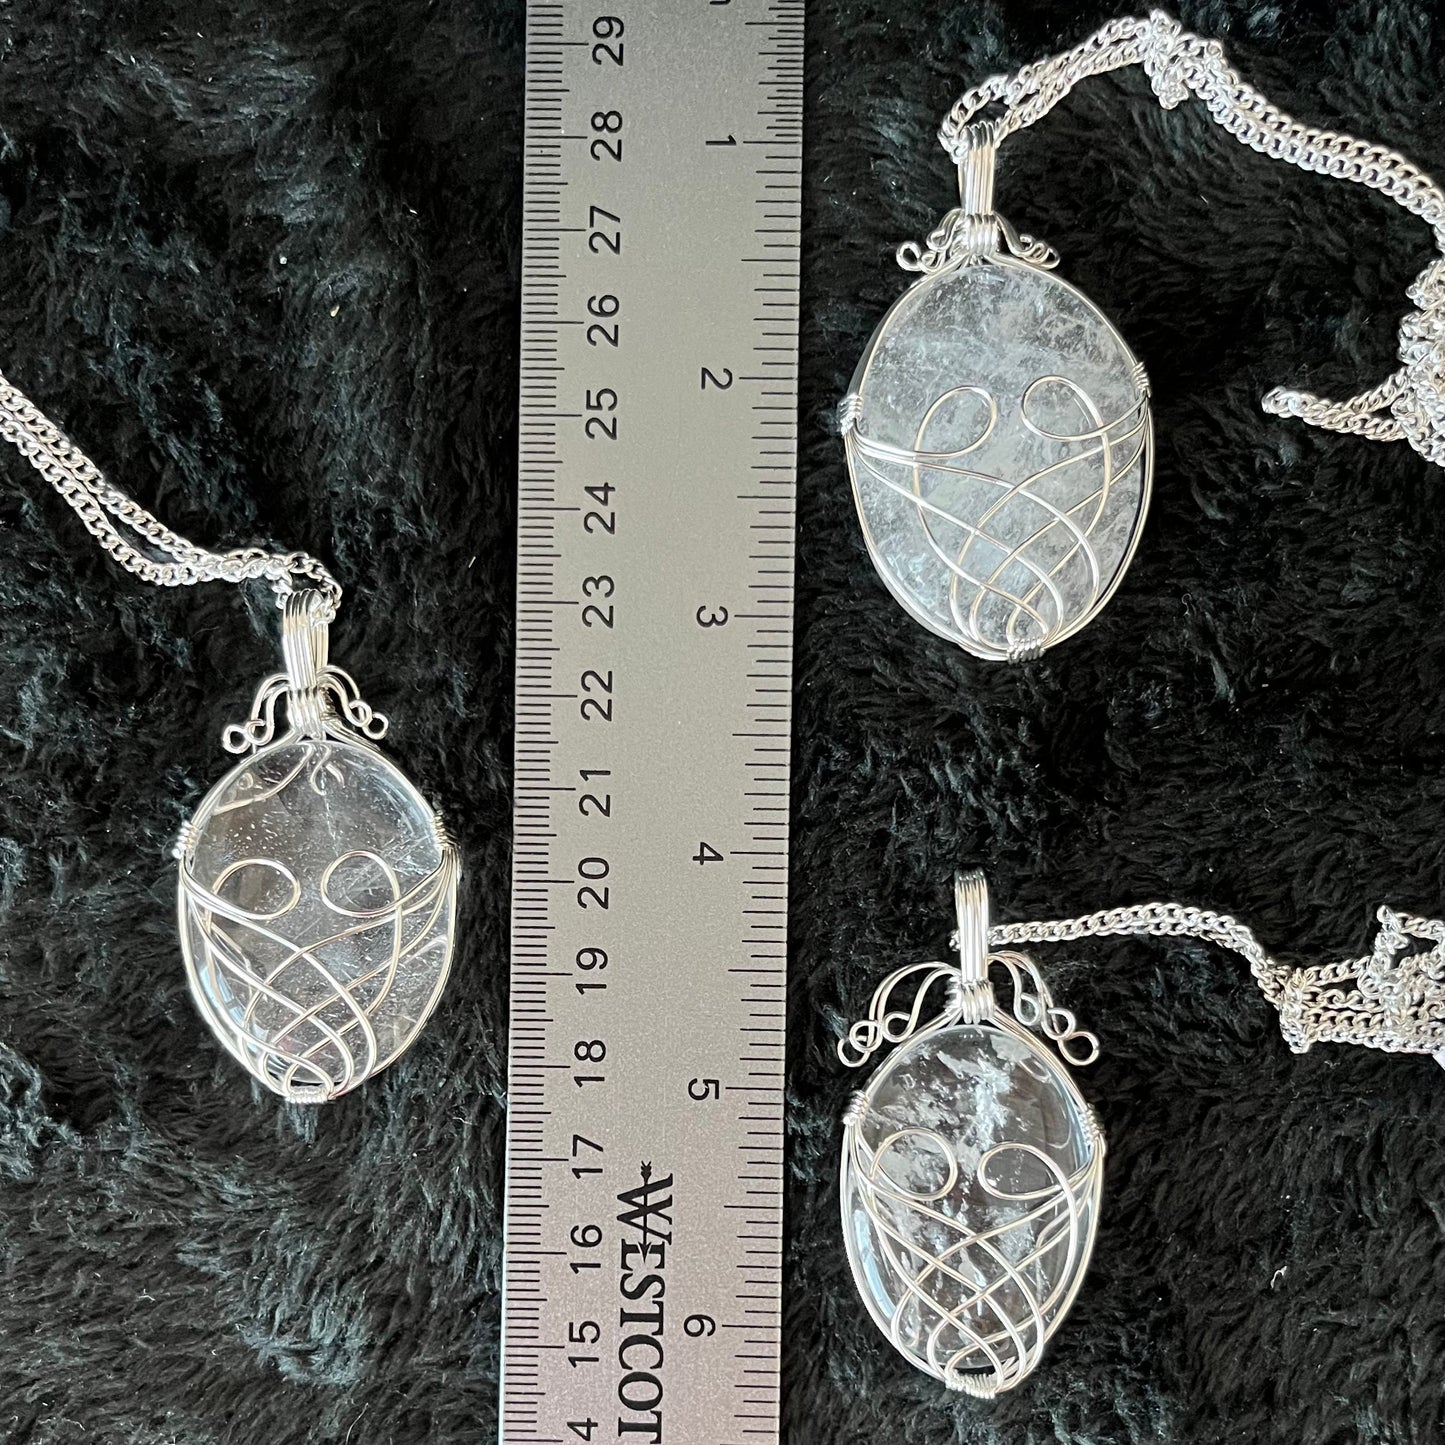 Three silver fancy wire wrapped clear quartz oval stone pendants attatched to silver chains, displayed next to a ruler.  quartz ovals are 1 3/4" - 2 1/4" long